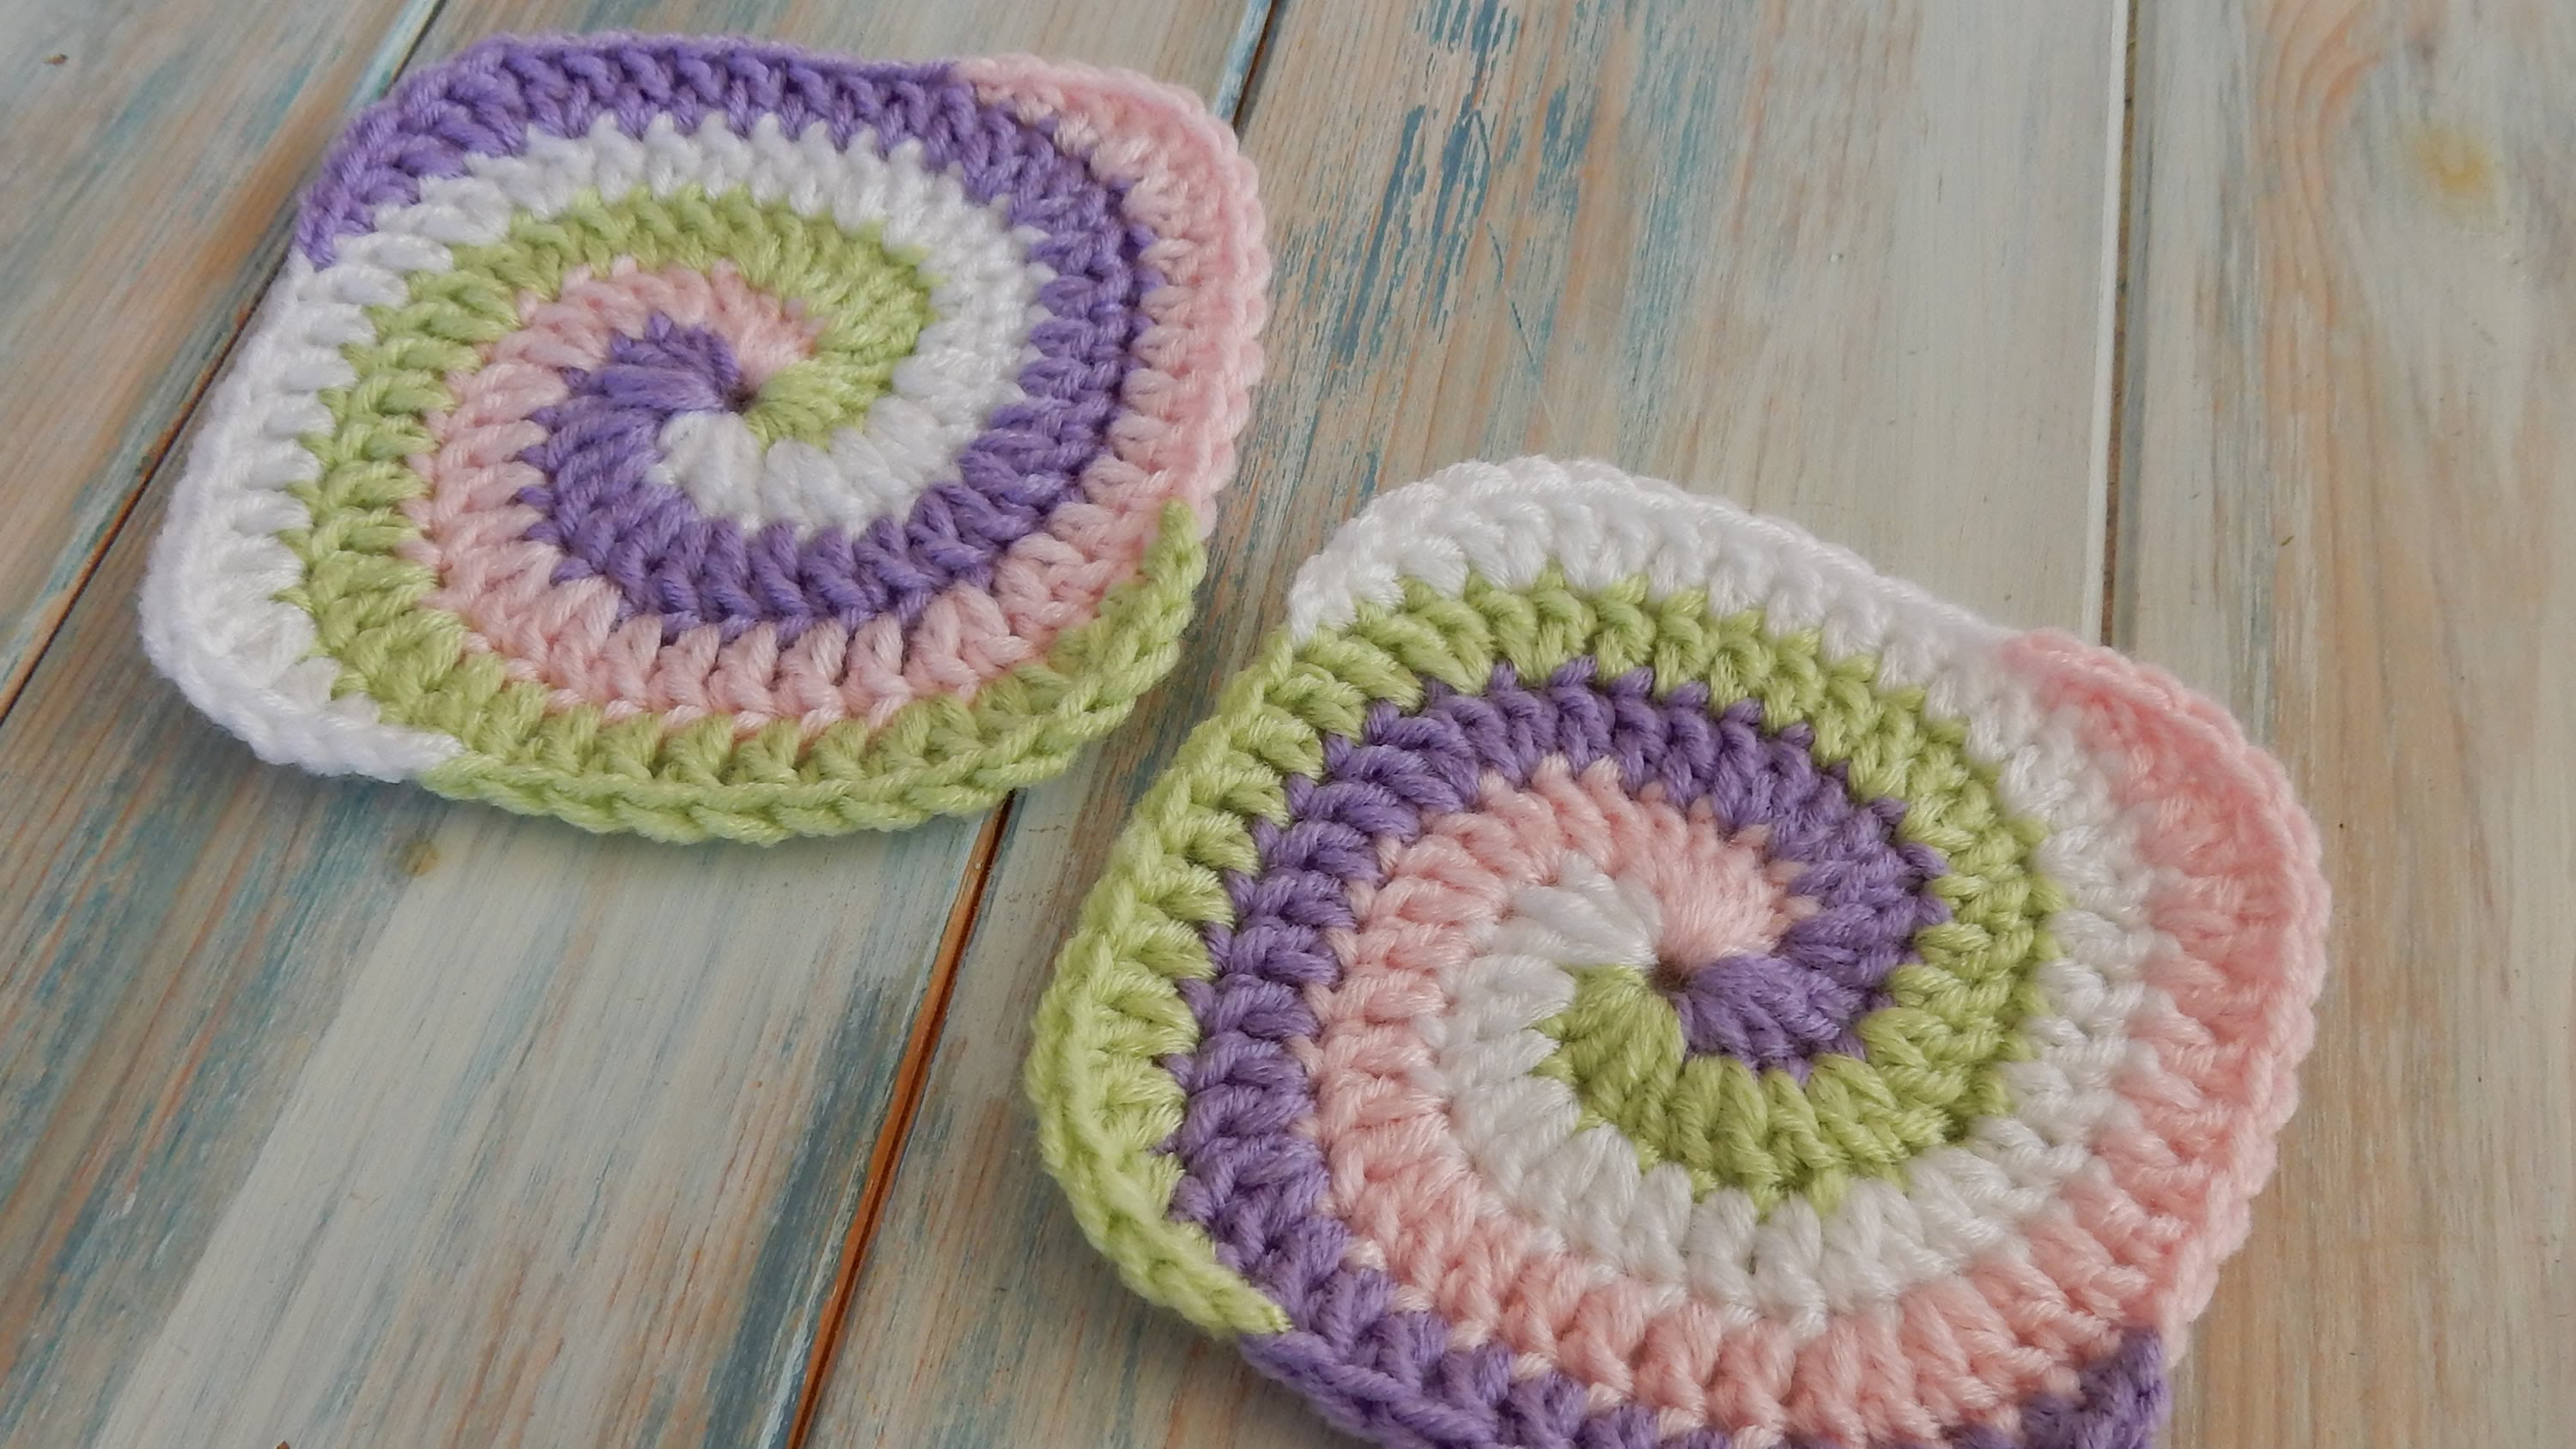 Crochet Granny Square Pattern Video Tutorial This Cute Spiral Granny Square Is Surprisingly Easy